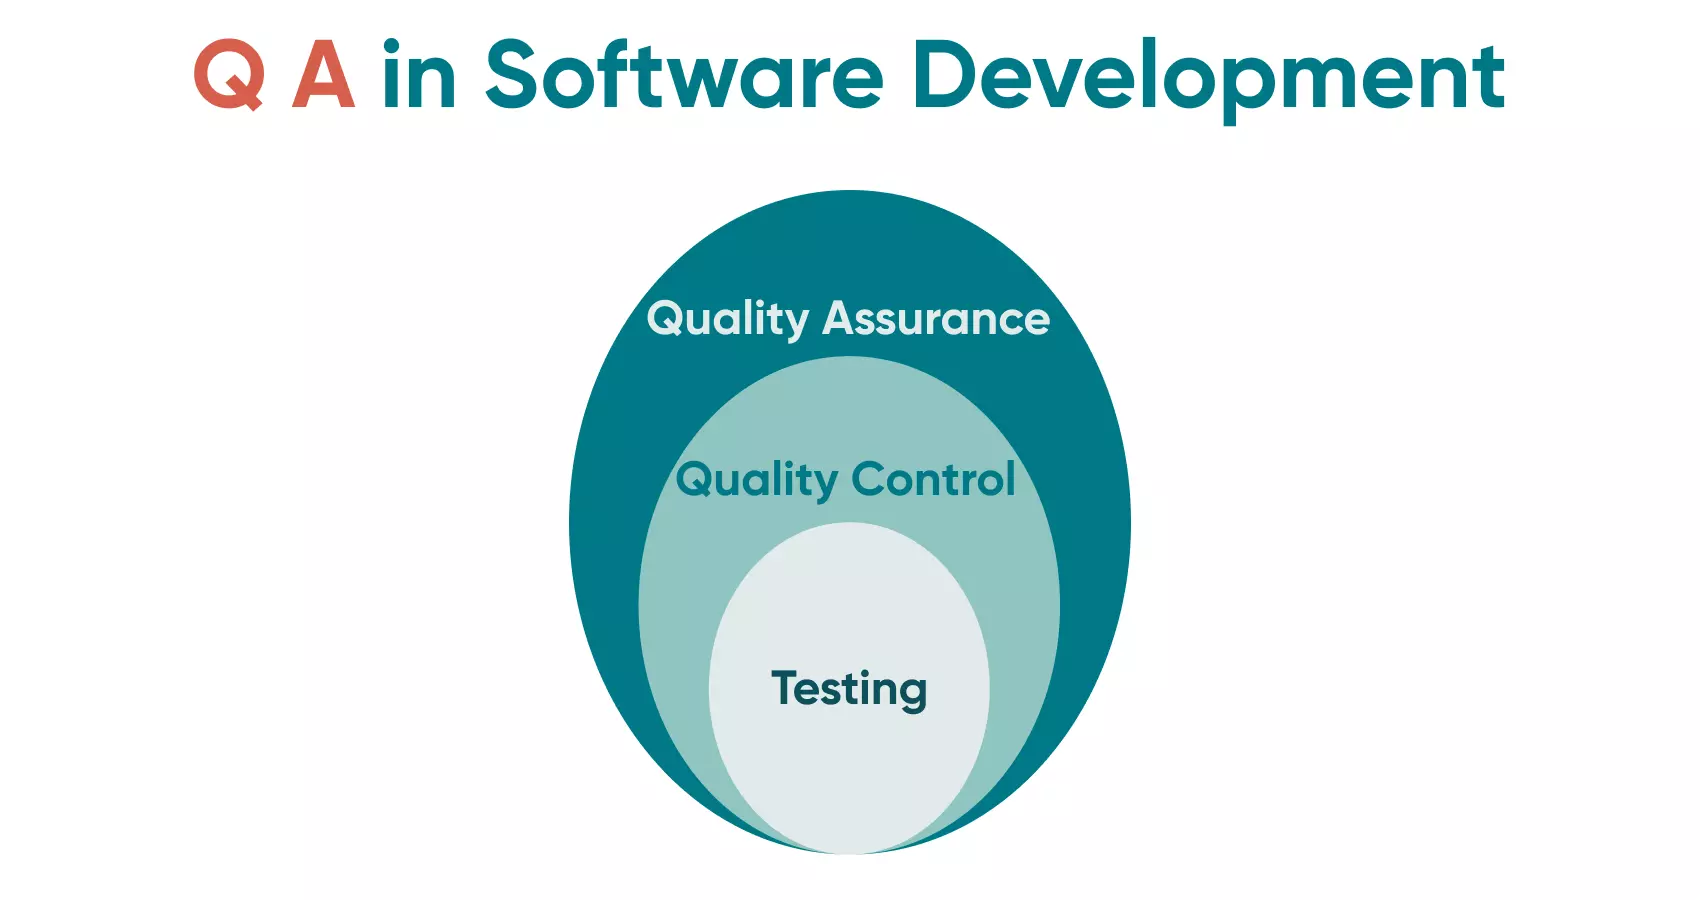 A brief look at the processes within Quality Assurance (QA) in Software Development..